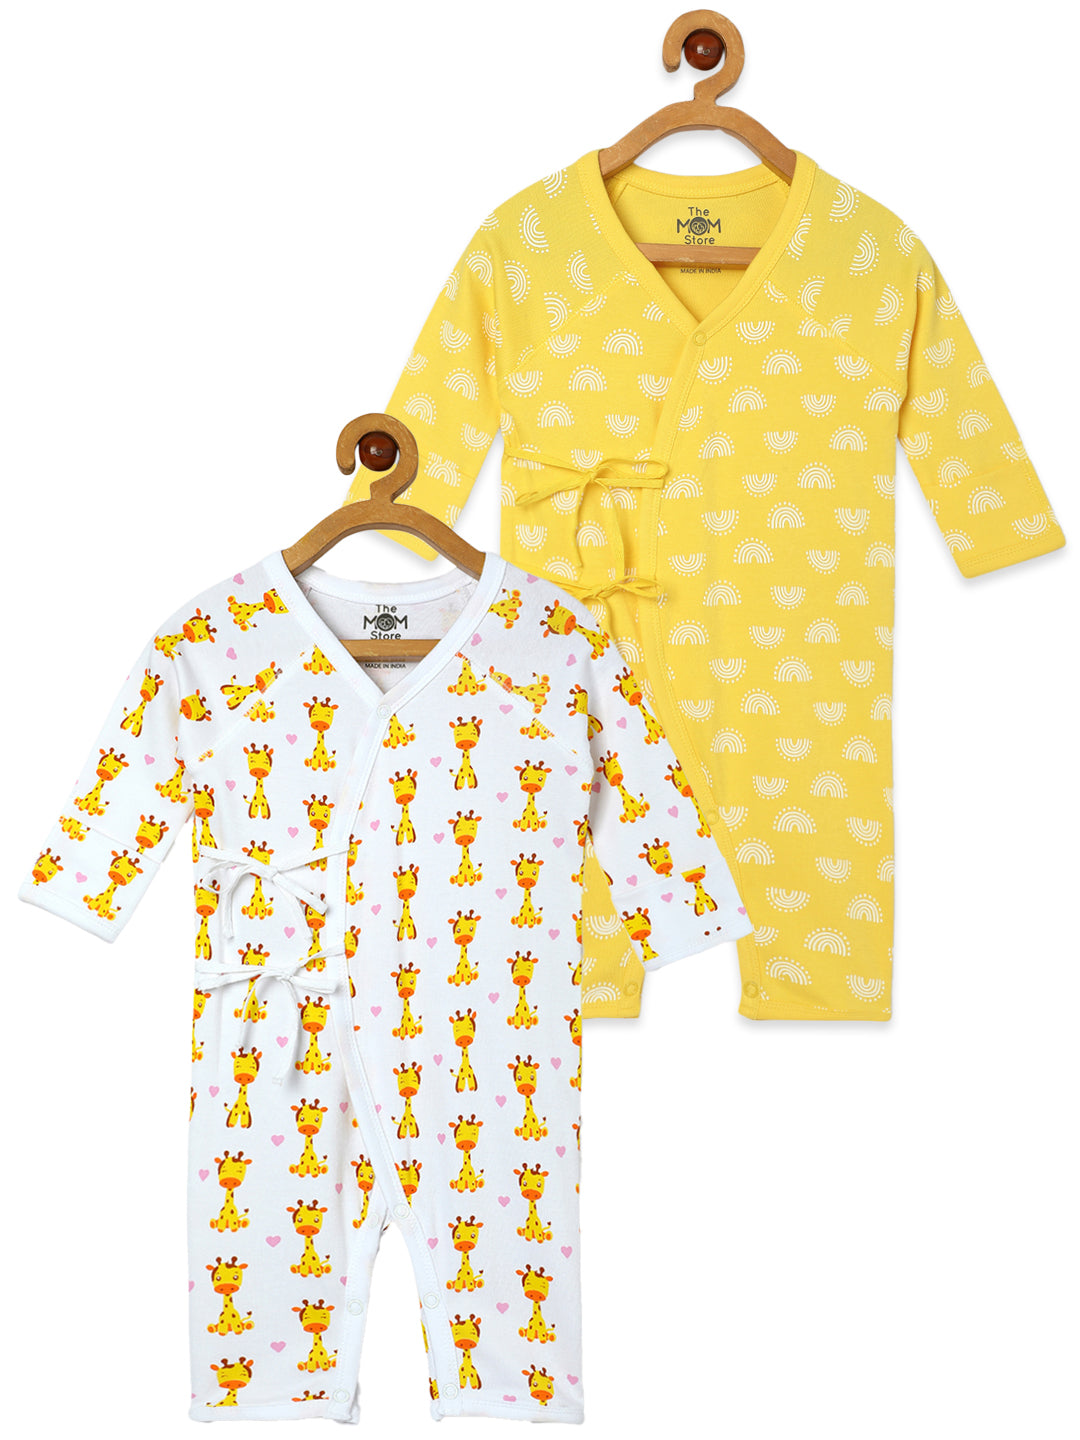 Jabla Infant Romper Combo Of 2: Get On My Level-The Sun Crown